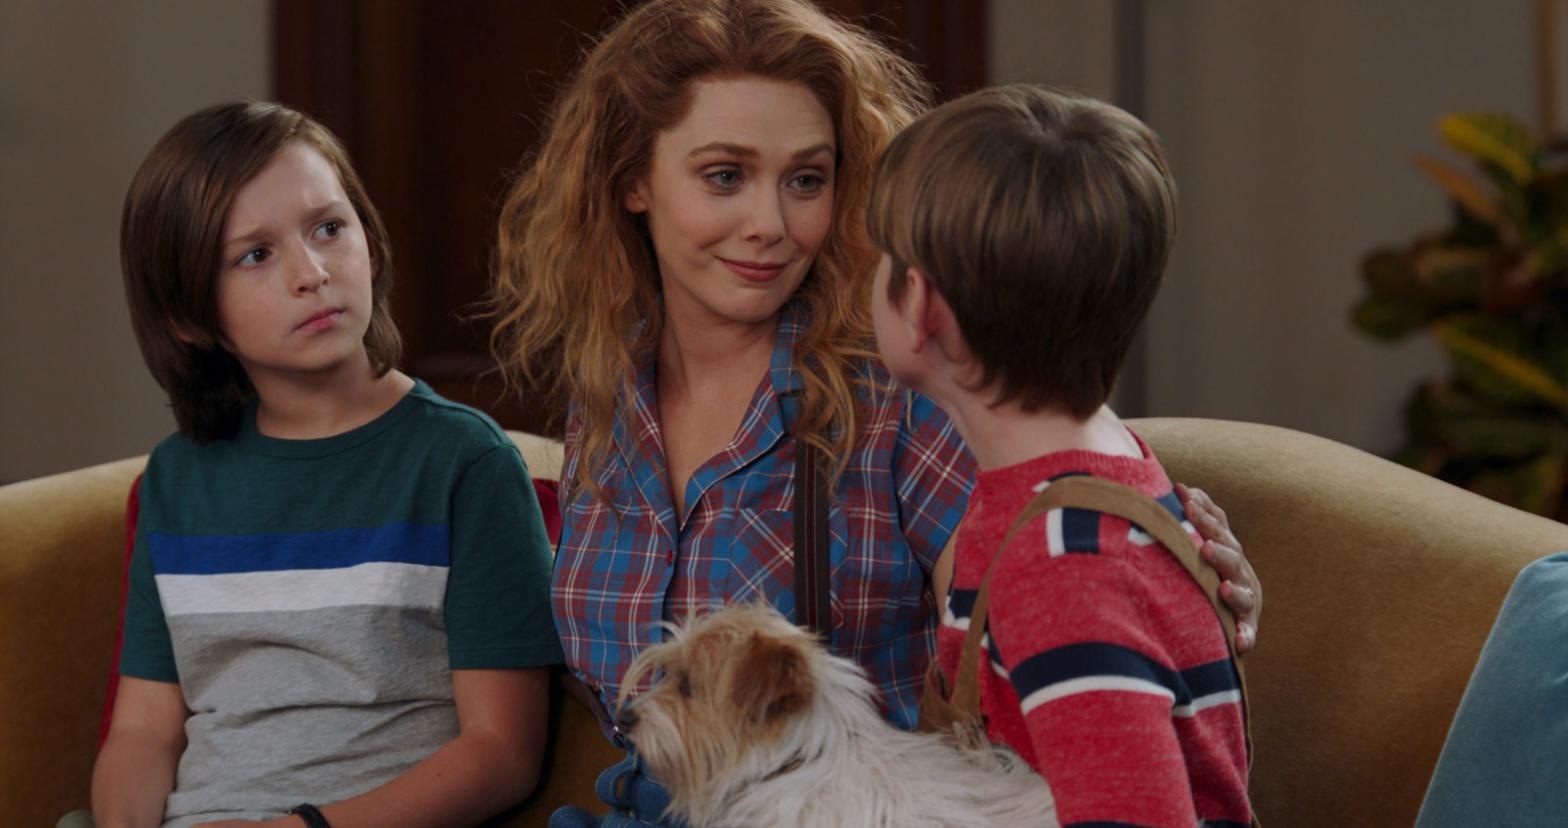 Wanda, her sons, and their dog, Sparky. (Image: Disney+/Marvel)